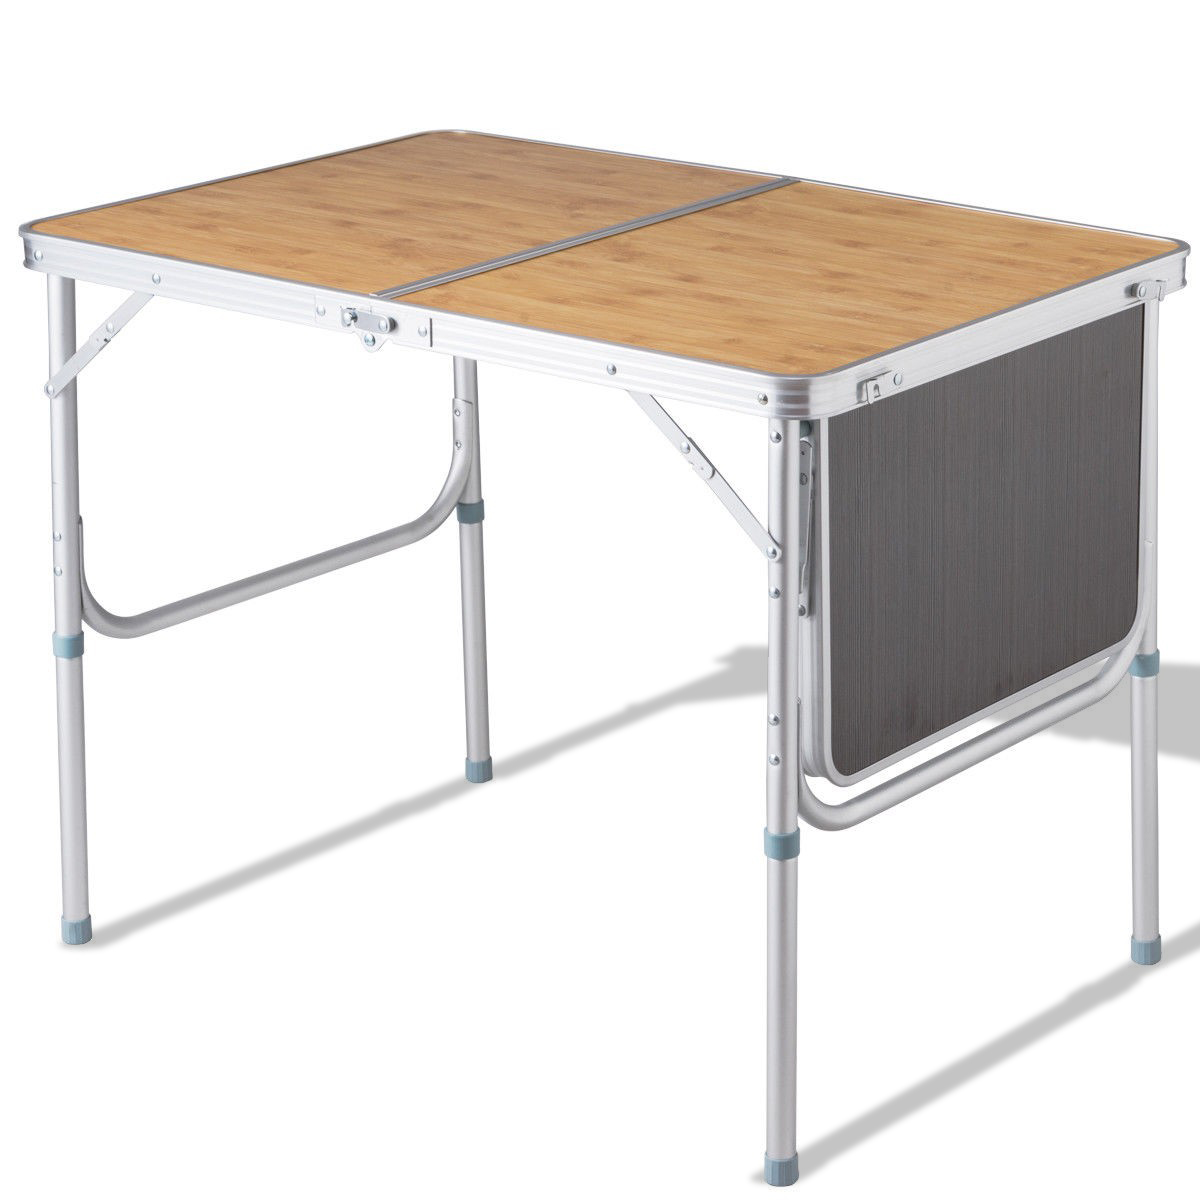 35.43 x 23.62 x 27.56 lapday Aluminum Folding Table Portable and Adjustable Rectangle Table for Party Backyard Beach BBQ Indoor and Outdoor Multipurpose Picnic Camping Table